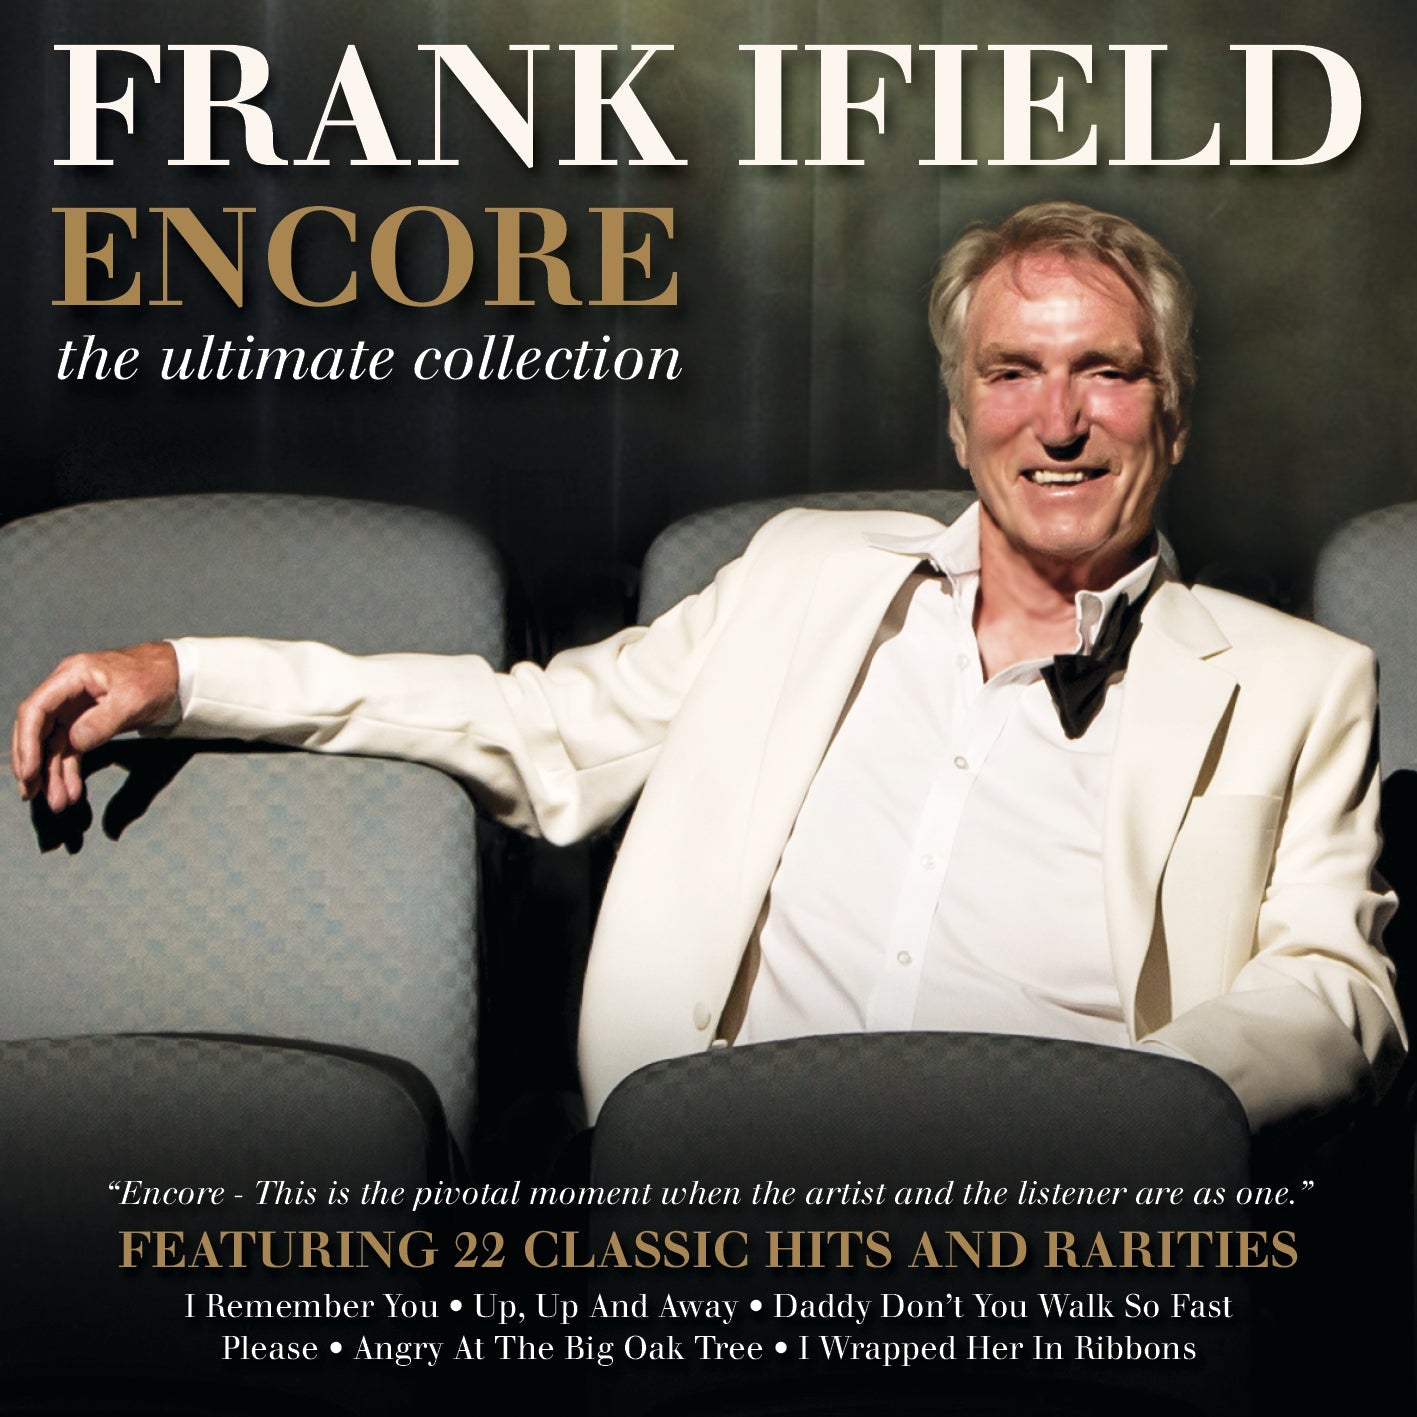 FRANK IFIELD - ENCORE: THE ULTIMATE COLLECTION